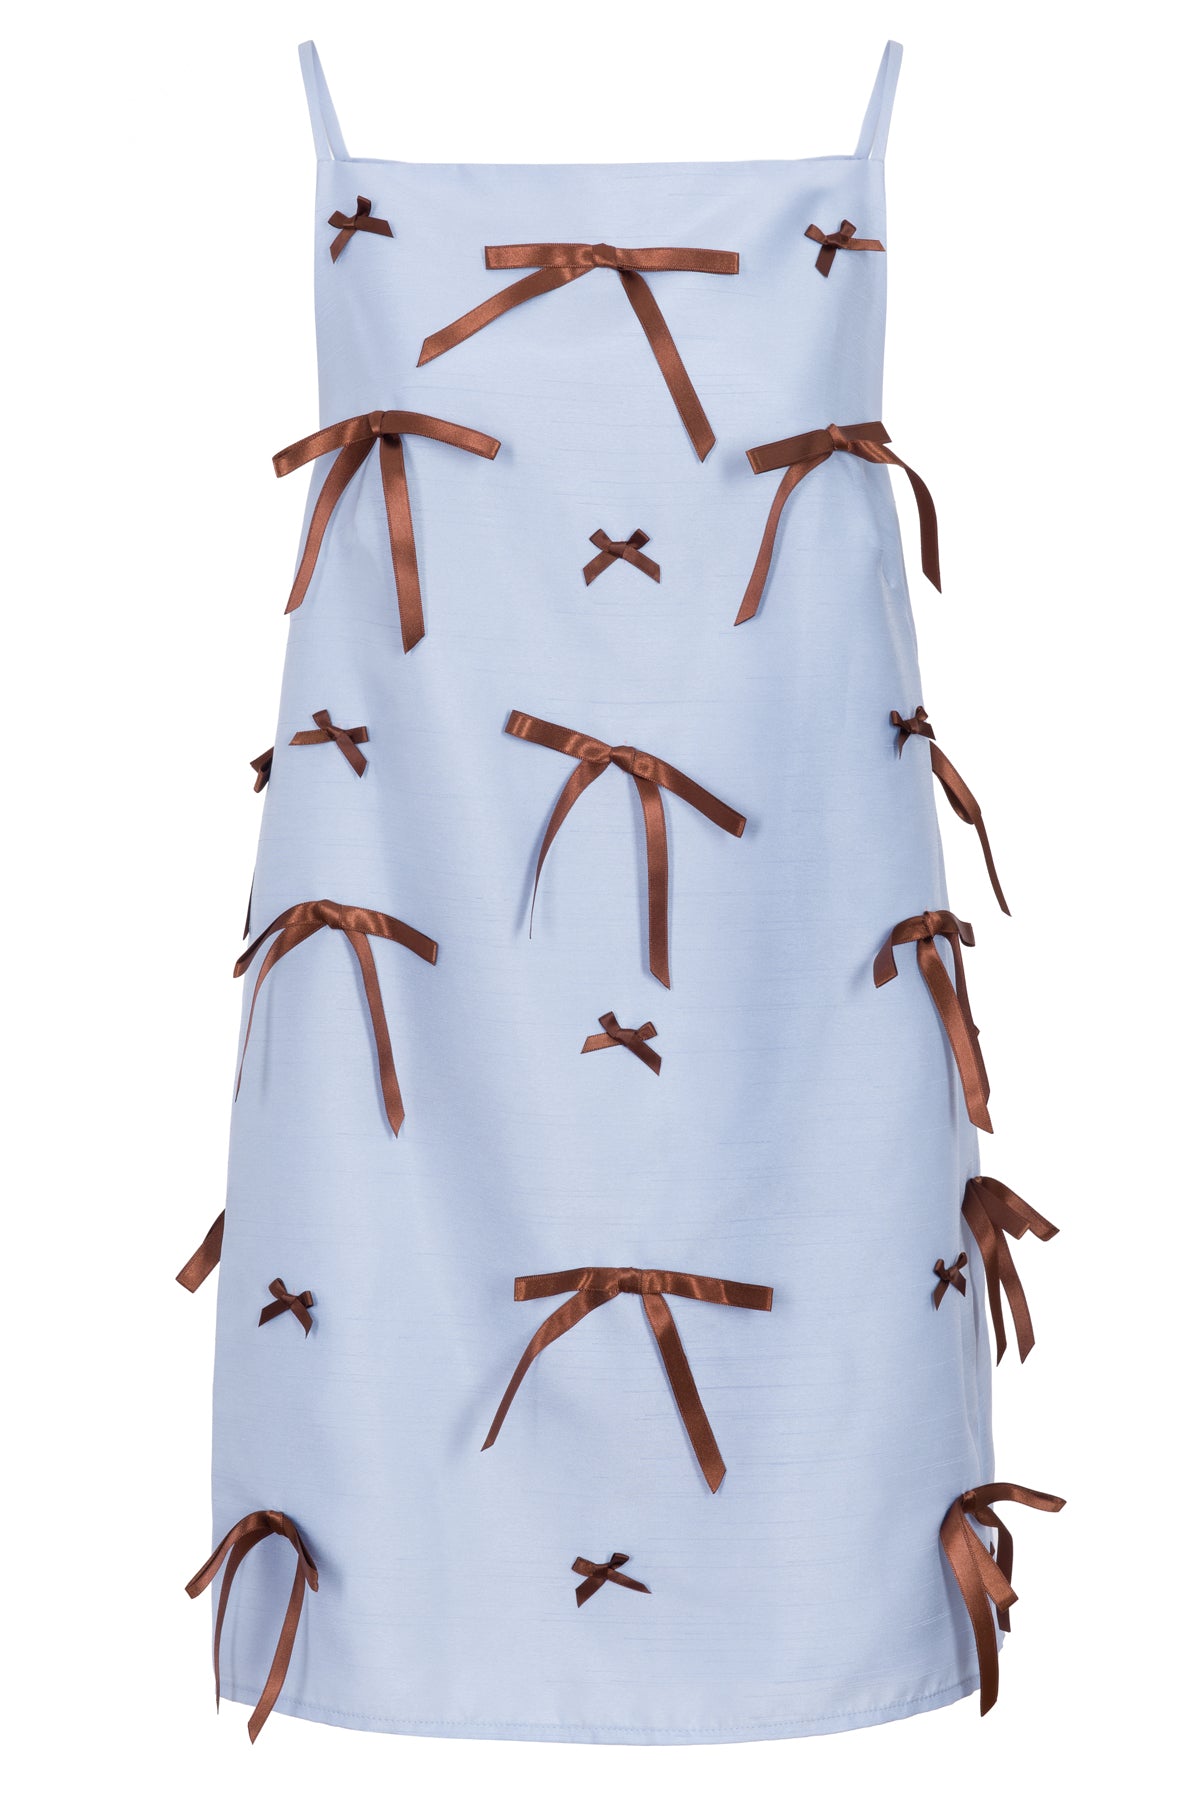 Brandy Pastel Blue Mini Dress with Brown Bows- Made to Order